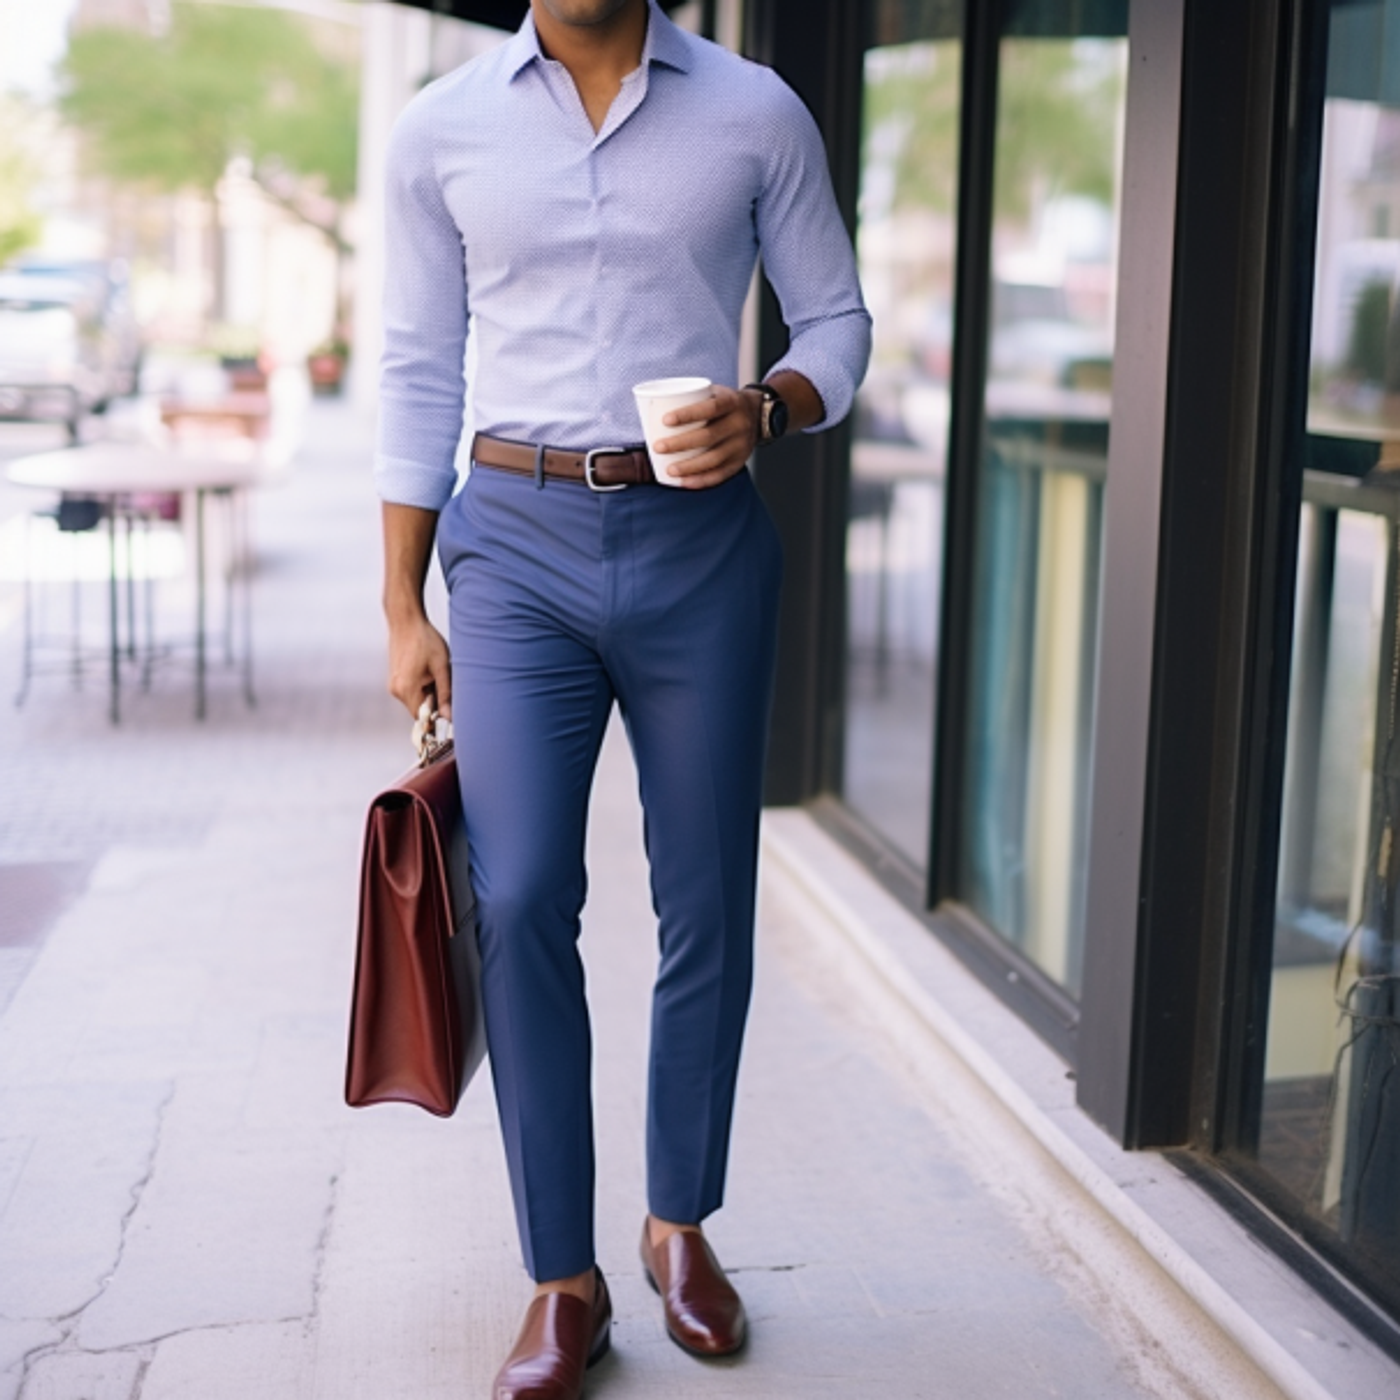 7 Ways Men Can Use Formal Wear To Their Advantage | The HUB